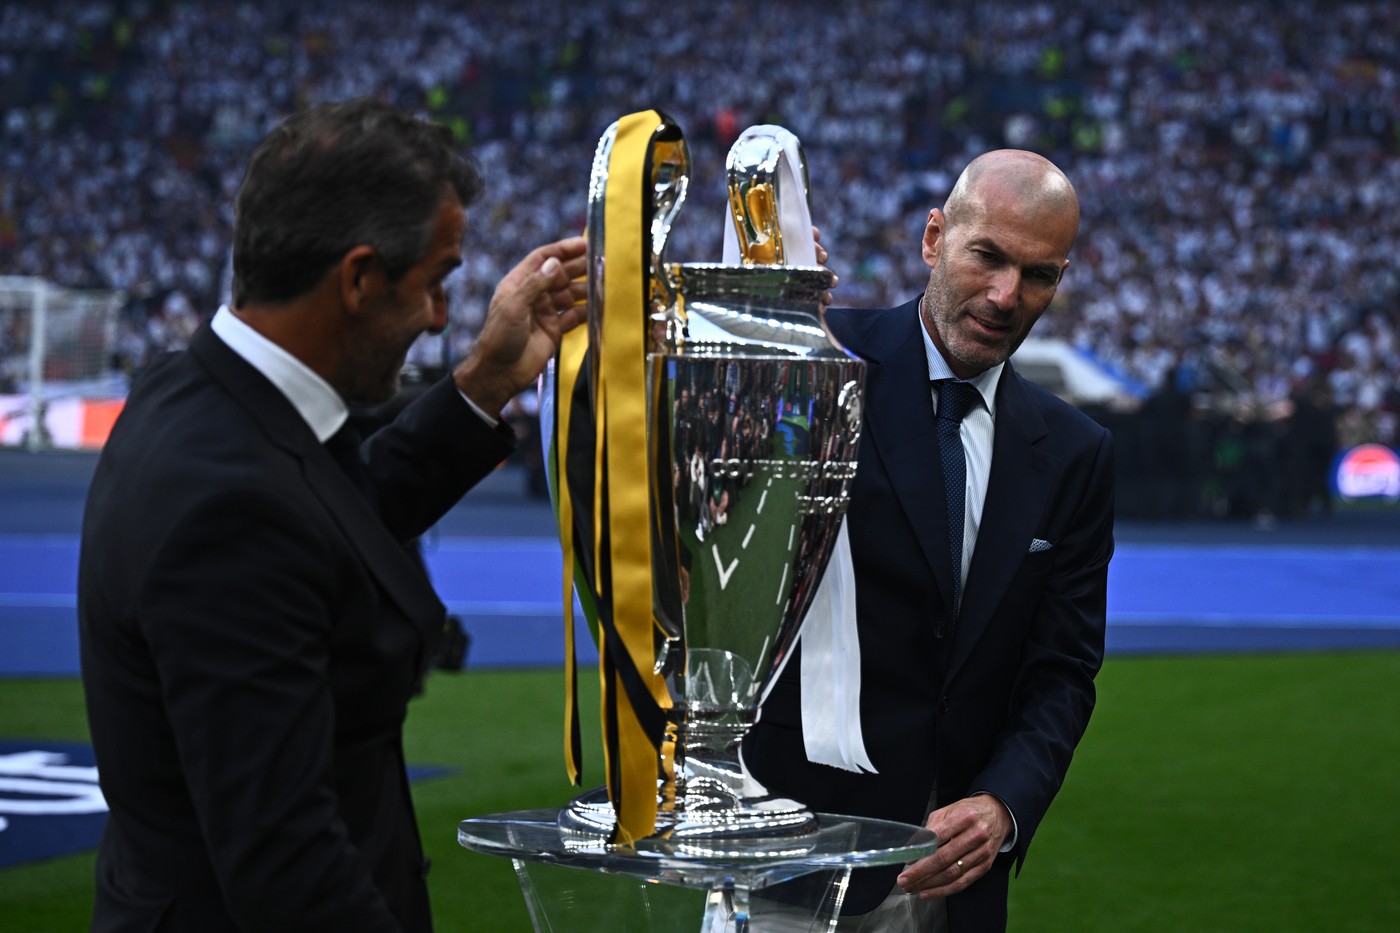 01 June 2024, Great Britain, London: Soccer: Champions League, Borussia Dortmund - Real Madrid, knockout round, final at Wembley Stadium, Zinedine Zidane (r), former soccer player, holds the Champions League trophy before the match.,Image: 878171993, License: Rights-managed, Restrictions: , Model Release: no